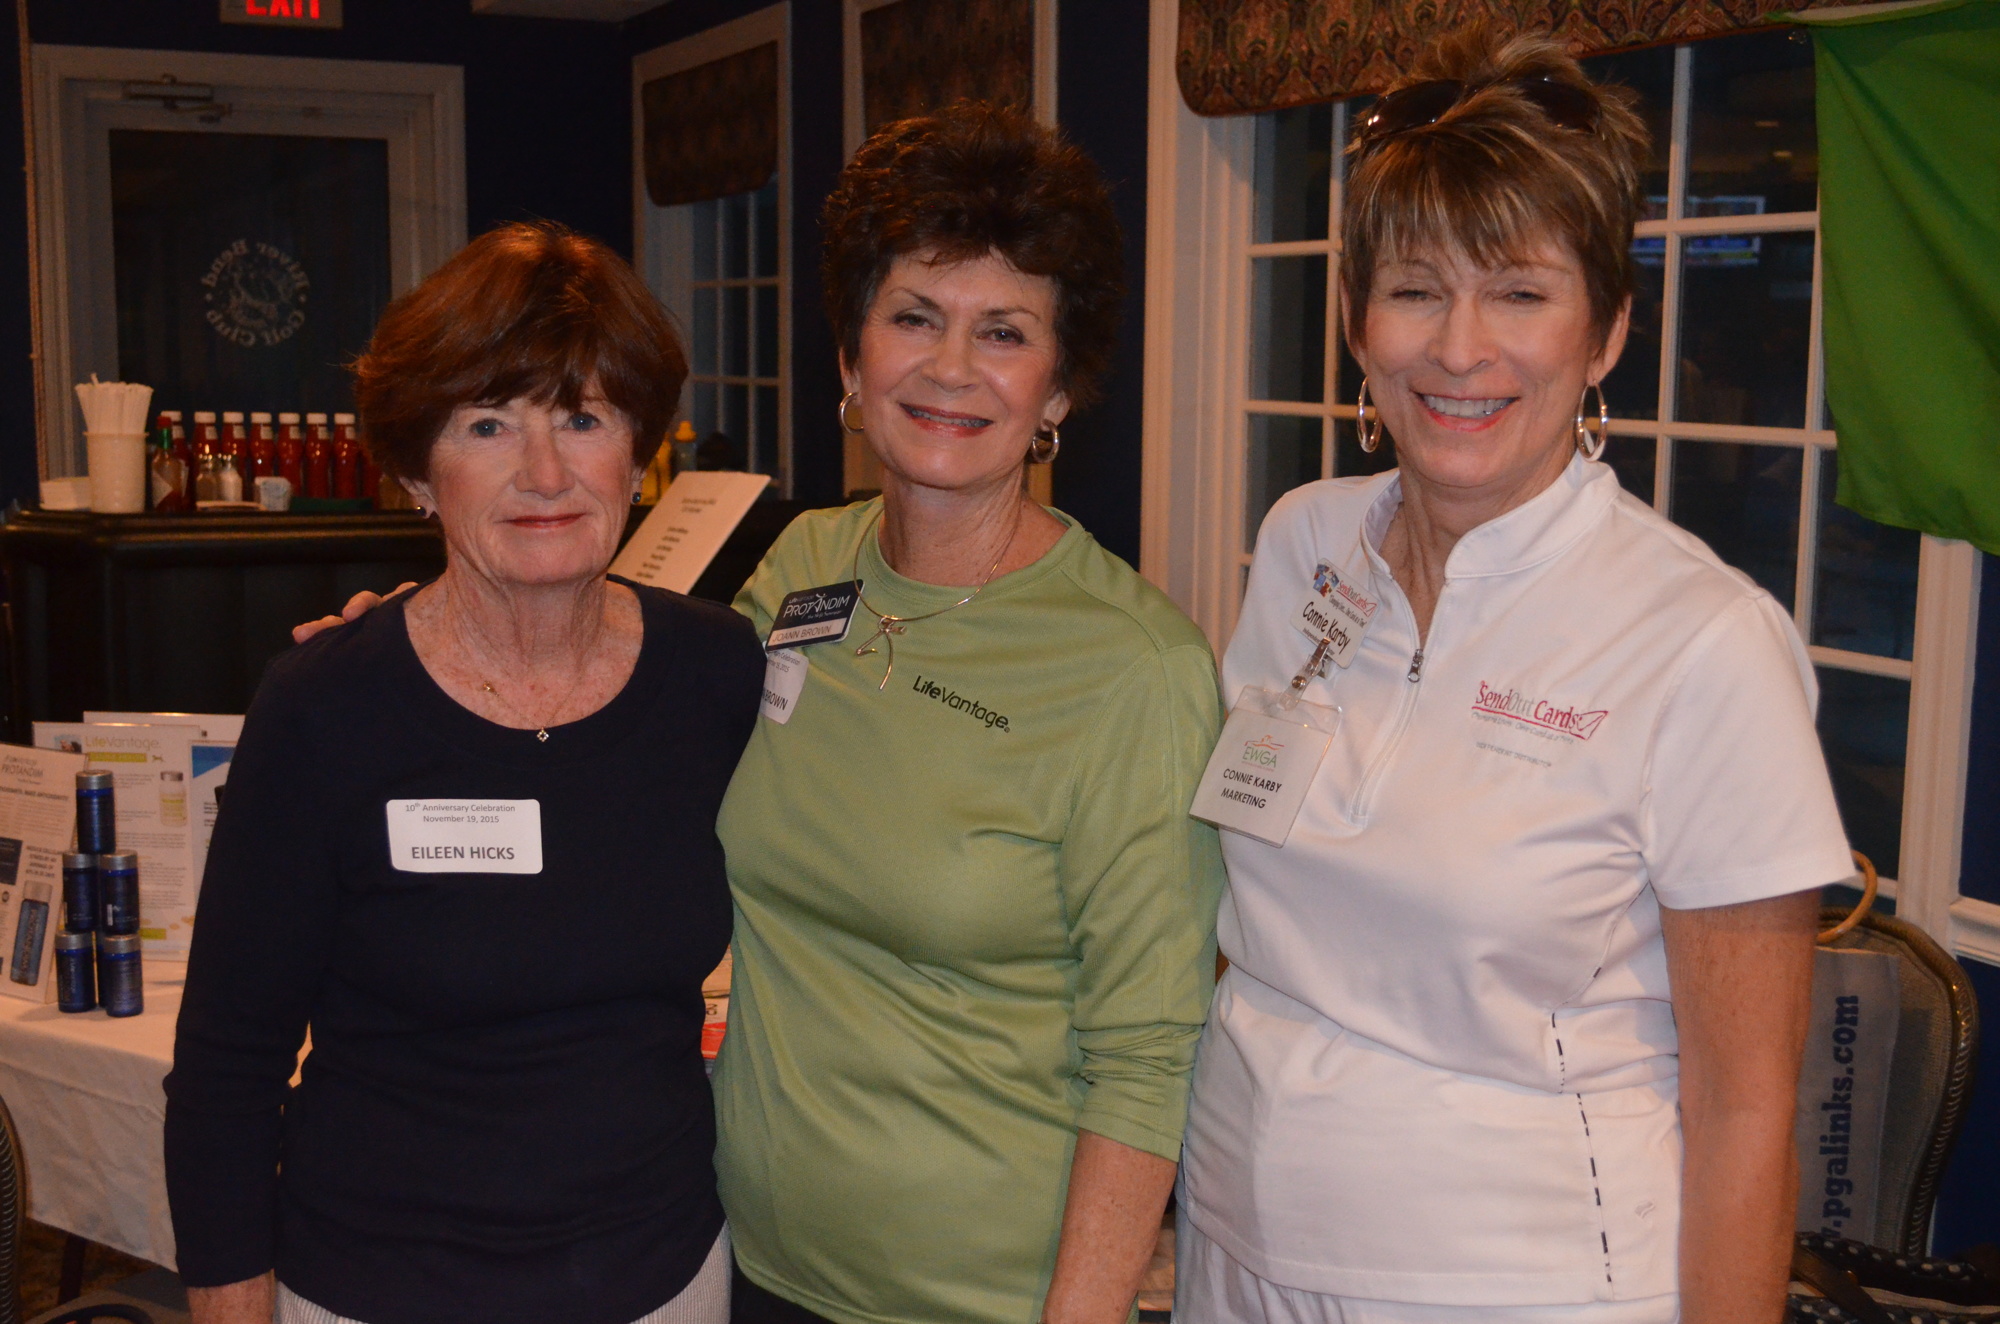 Eileen Hicks, Joann Brown and Connie Karby, communications director, meet at the party.